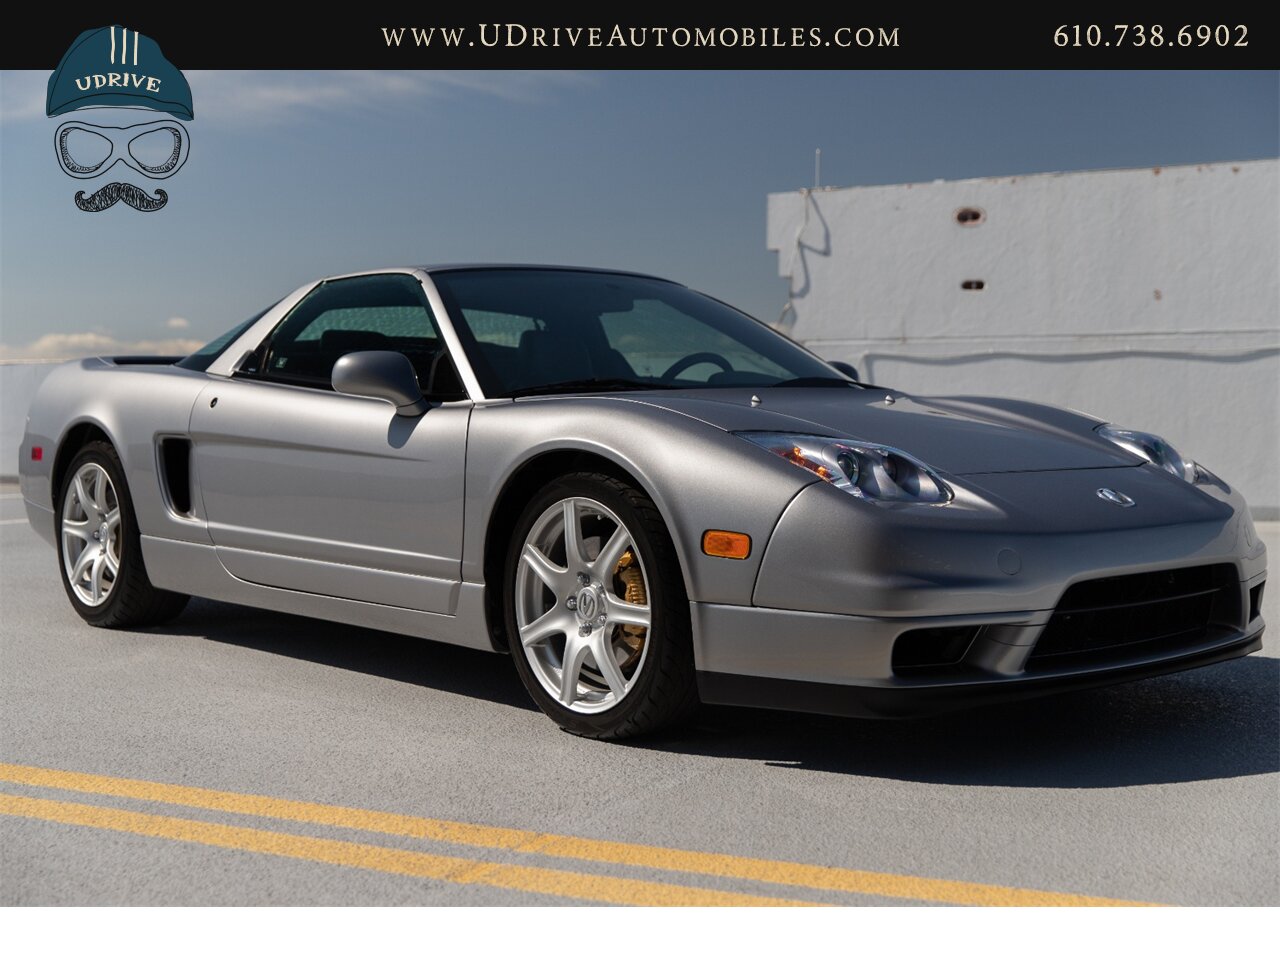 2002 Acura NSX NSX-T 9k Miles 6 Speed Manual Service History  Collector Grade - Photo 15 - West Chester, PA 19382